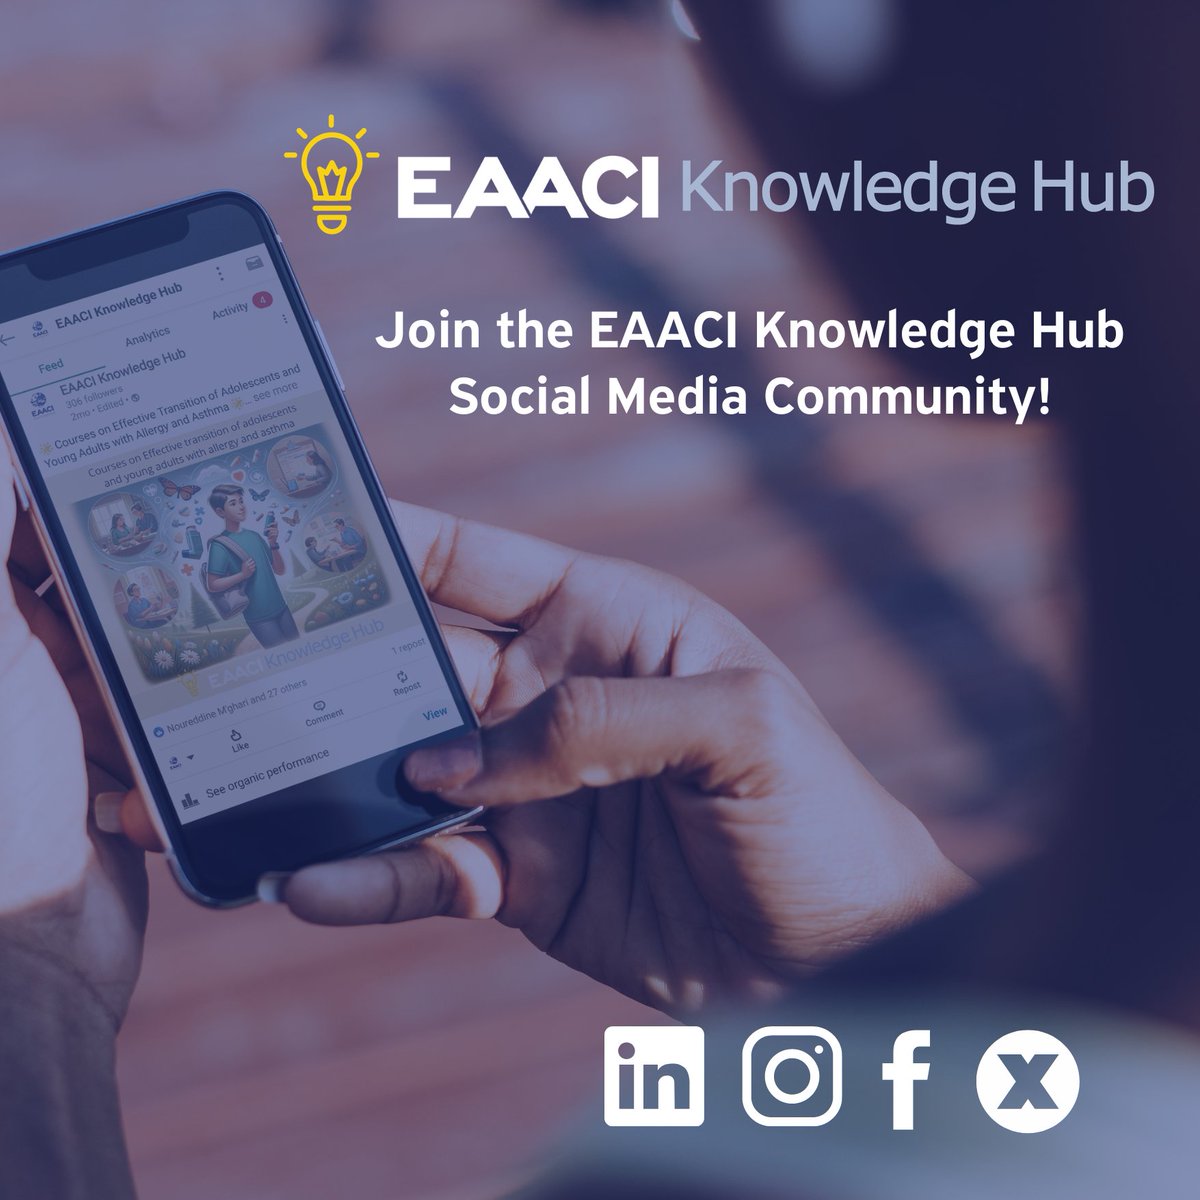 Stay Connected with EAACI KH! 🌟 Don't miss out on the latest updates from the EAACI Knowledge Hub! Join our virtual community! ✔️LinkedIn: ow.ly/ZNUG50RcSLt ✔️Instagram: ow.ly/Posm50RcSLy ✔️Facebook: ow.ly/LQFi50RcSLu ✔️X: ow.ly/PyXT50RcSLx